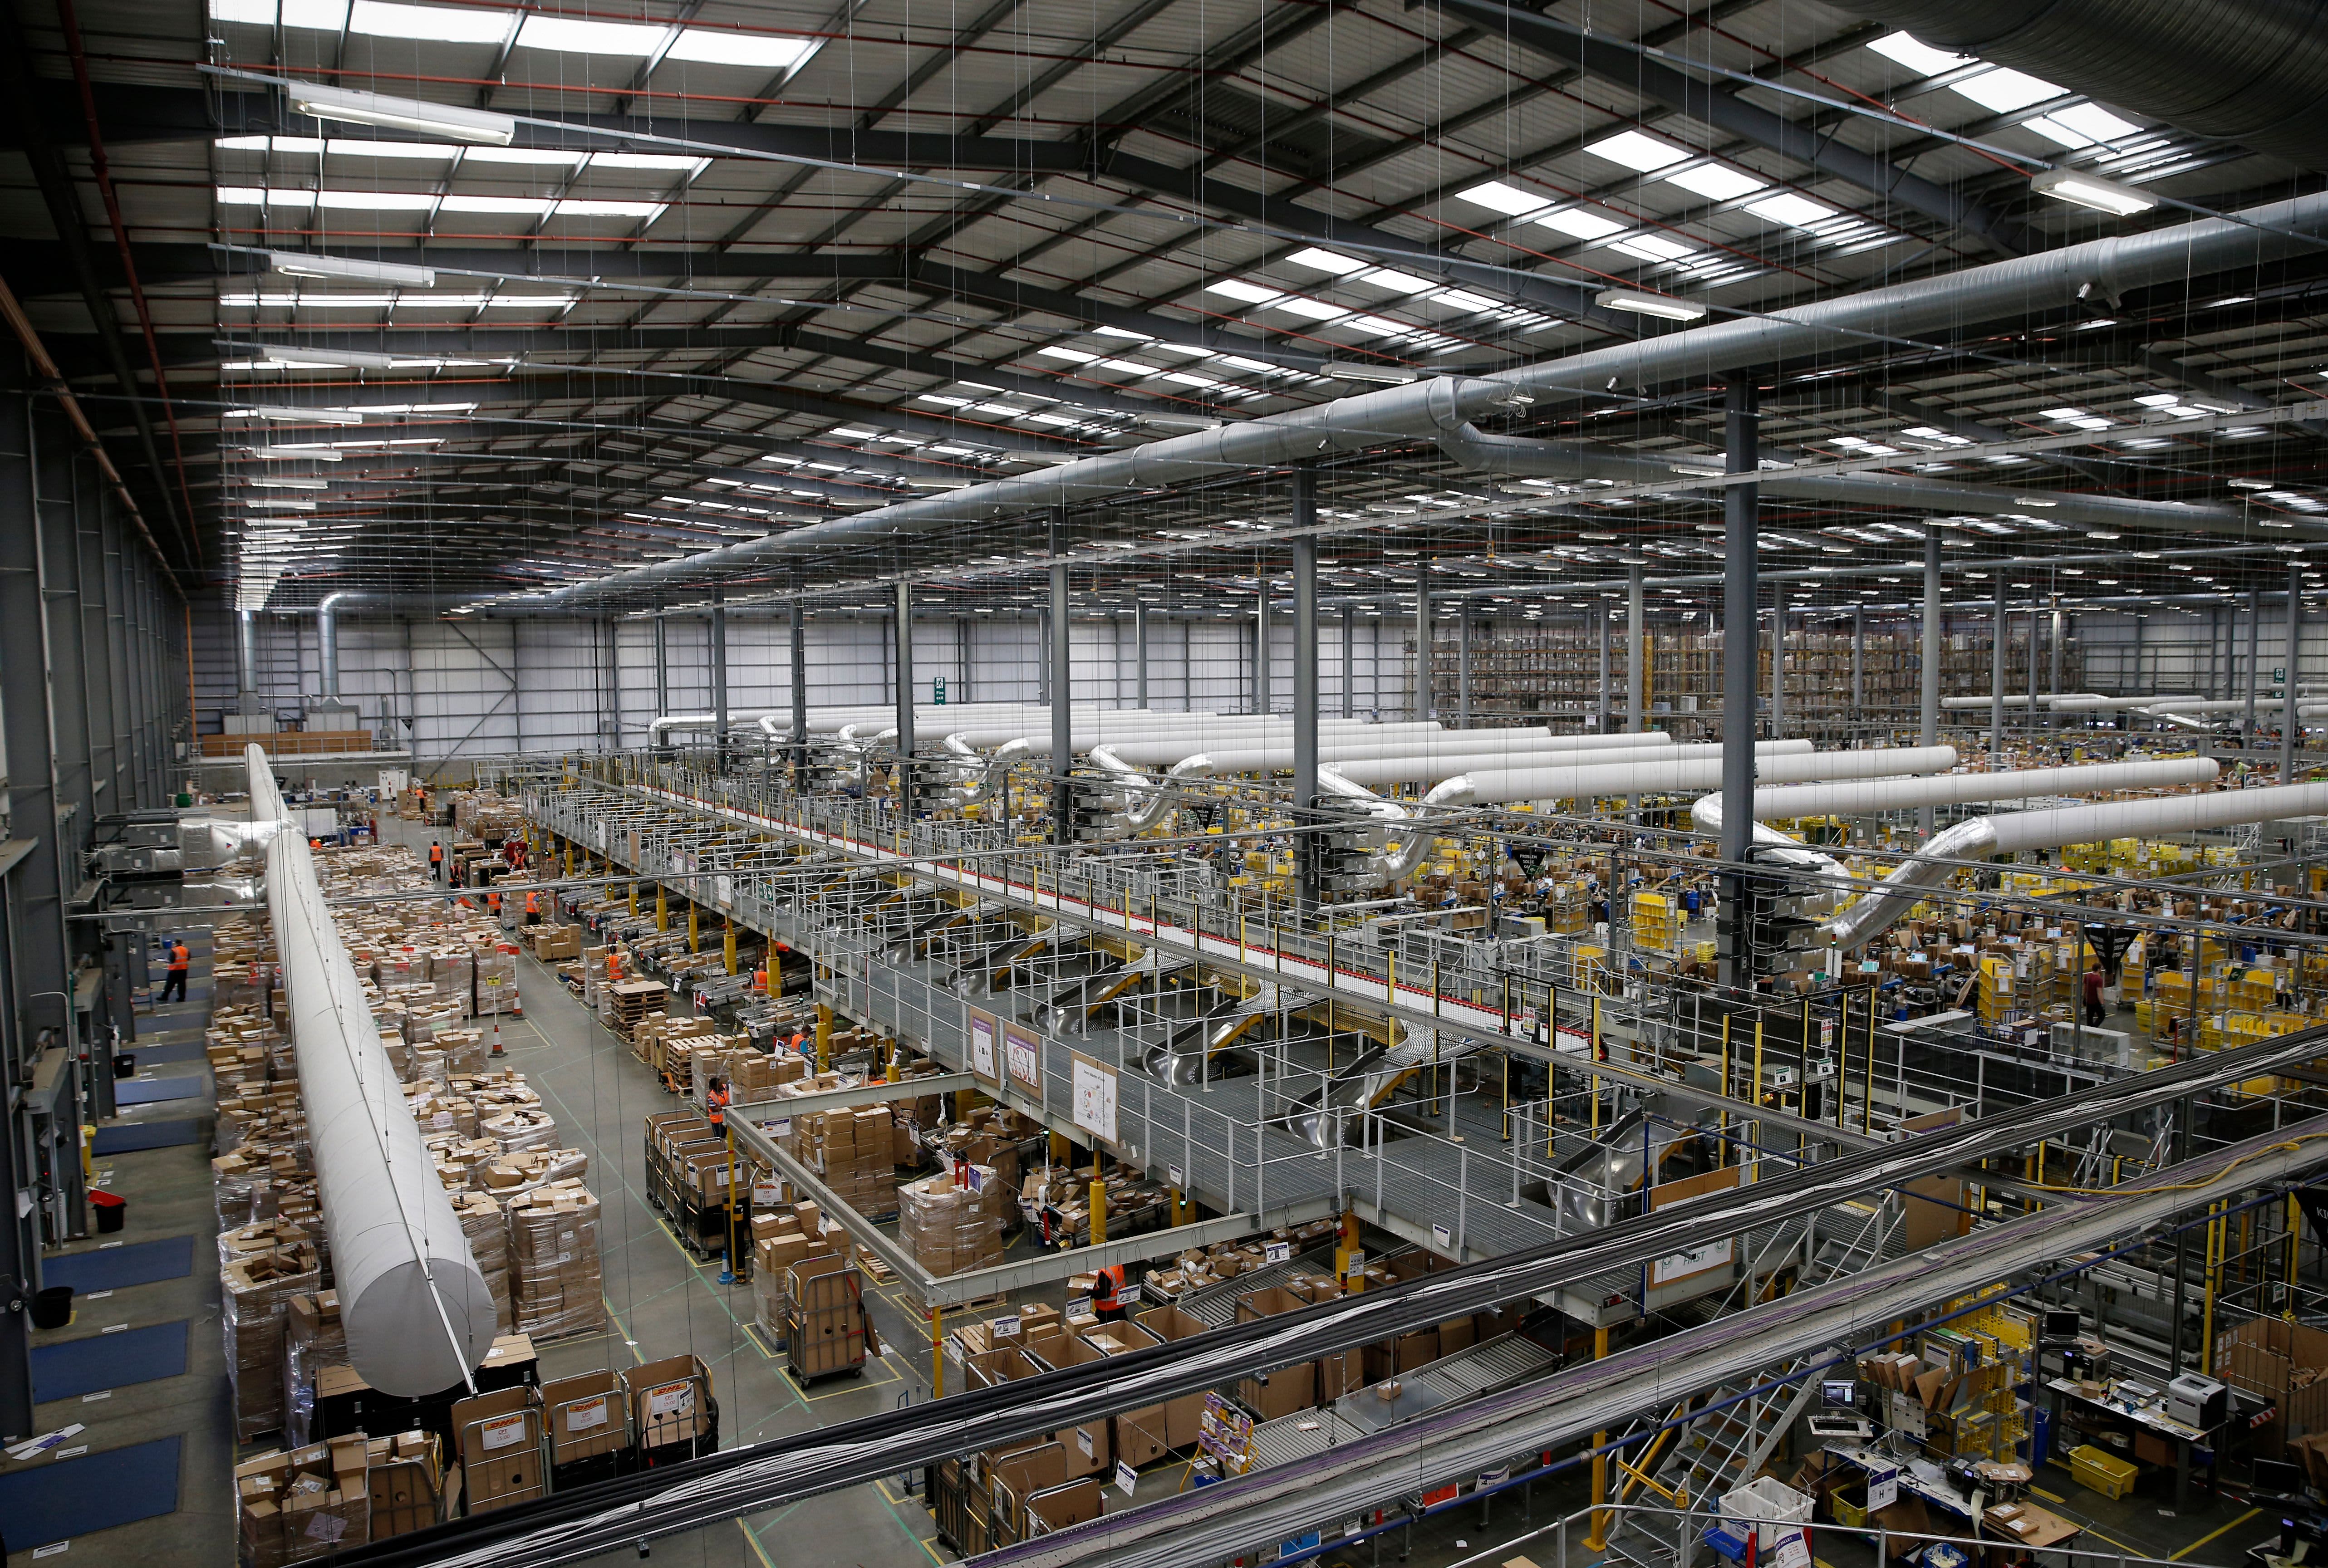 plans to close three UK warehouses, impacting 1,200 workers